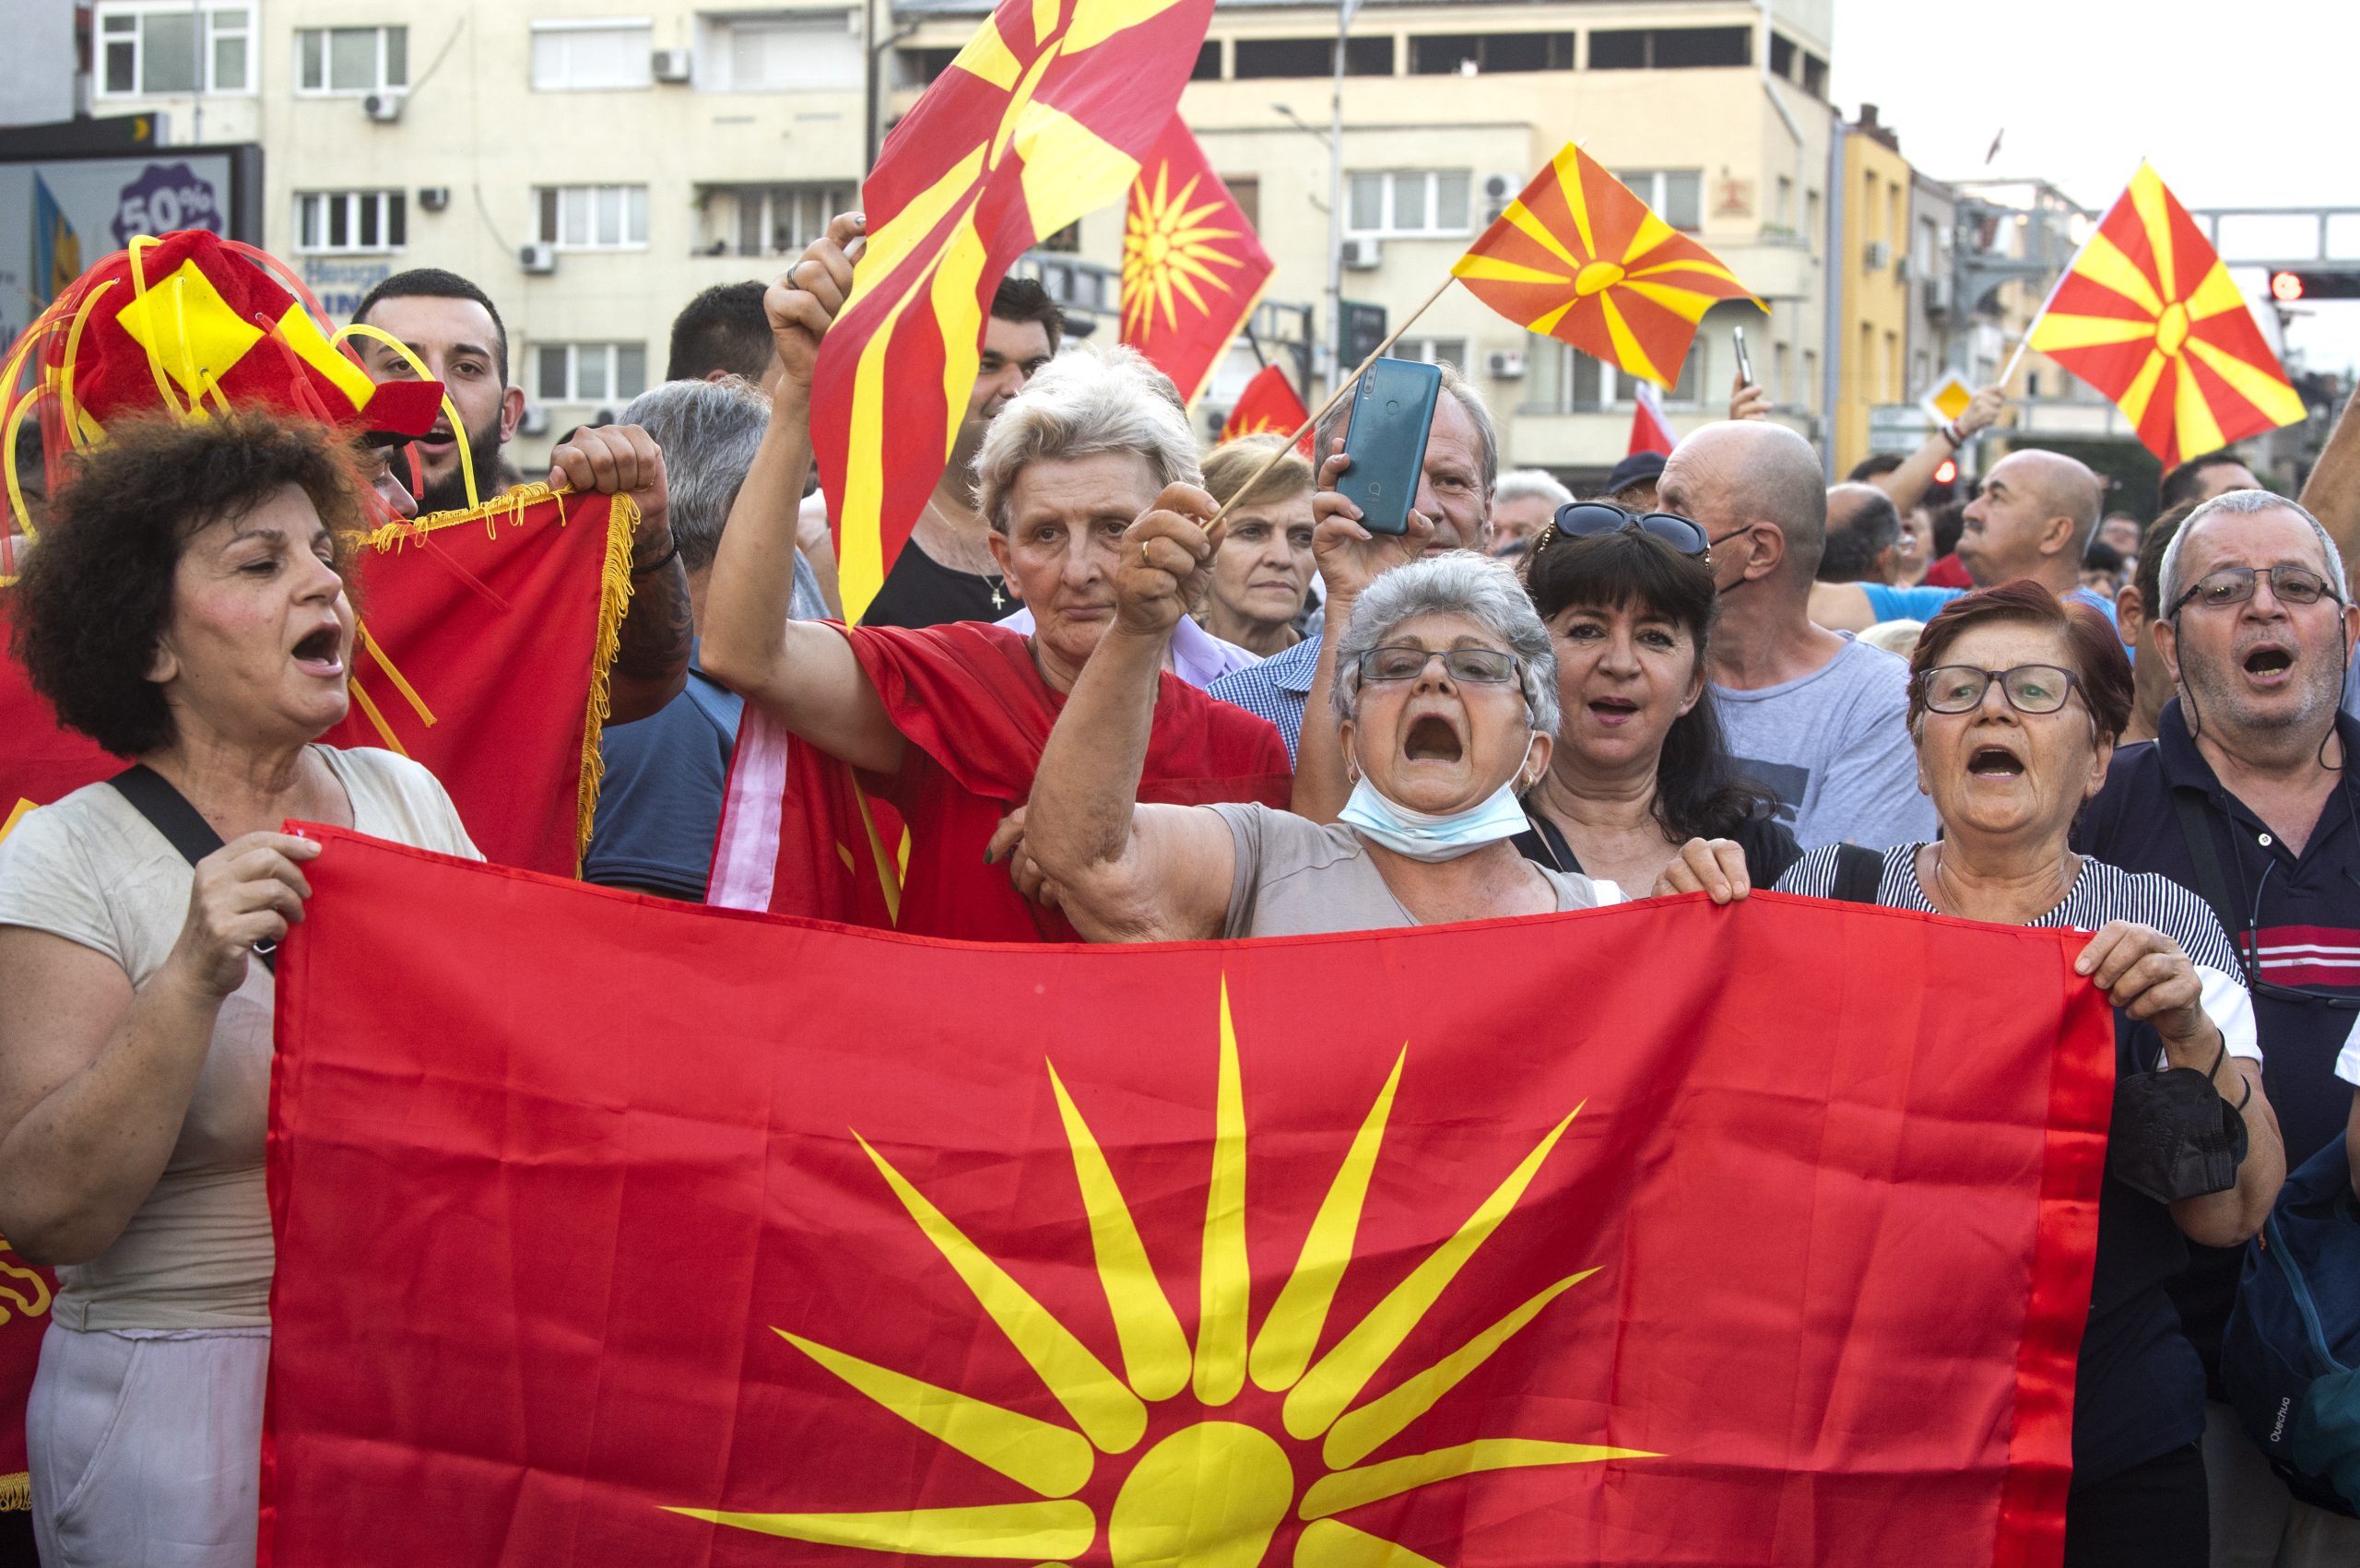 epa10048567 Supporters of the opposition party VMRO DPMNE and other citizens protest against the French proposal to resolve the dispute between North Macedonia and Bulgaria in Skopje, Republic of North Macedonia, 02 July 2022. The biggest opposition party VMRO DPMNE leads the protest against the French proposal, which comes after North Macedonia's Government intervention in Brussels and reaction to the draft documents that the public had the opportunity to discuss last week. The official views for the French proposal will be announced after the proposal passes the filters of all relevant institutions.  EPA/GEORGI LICOVSKI